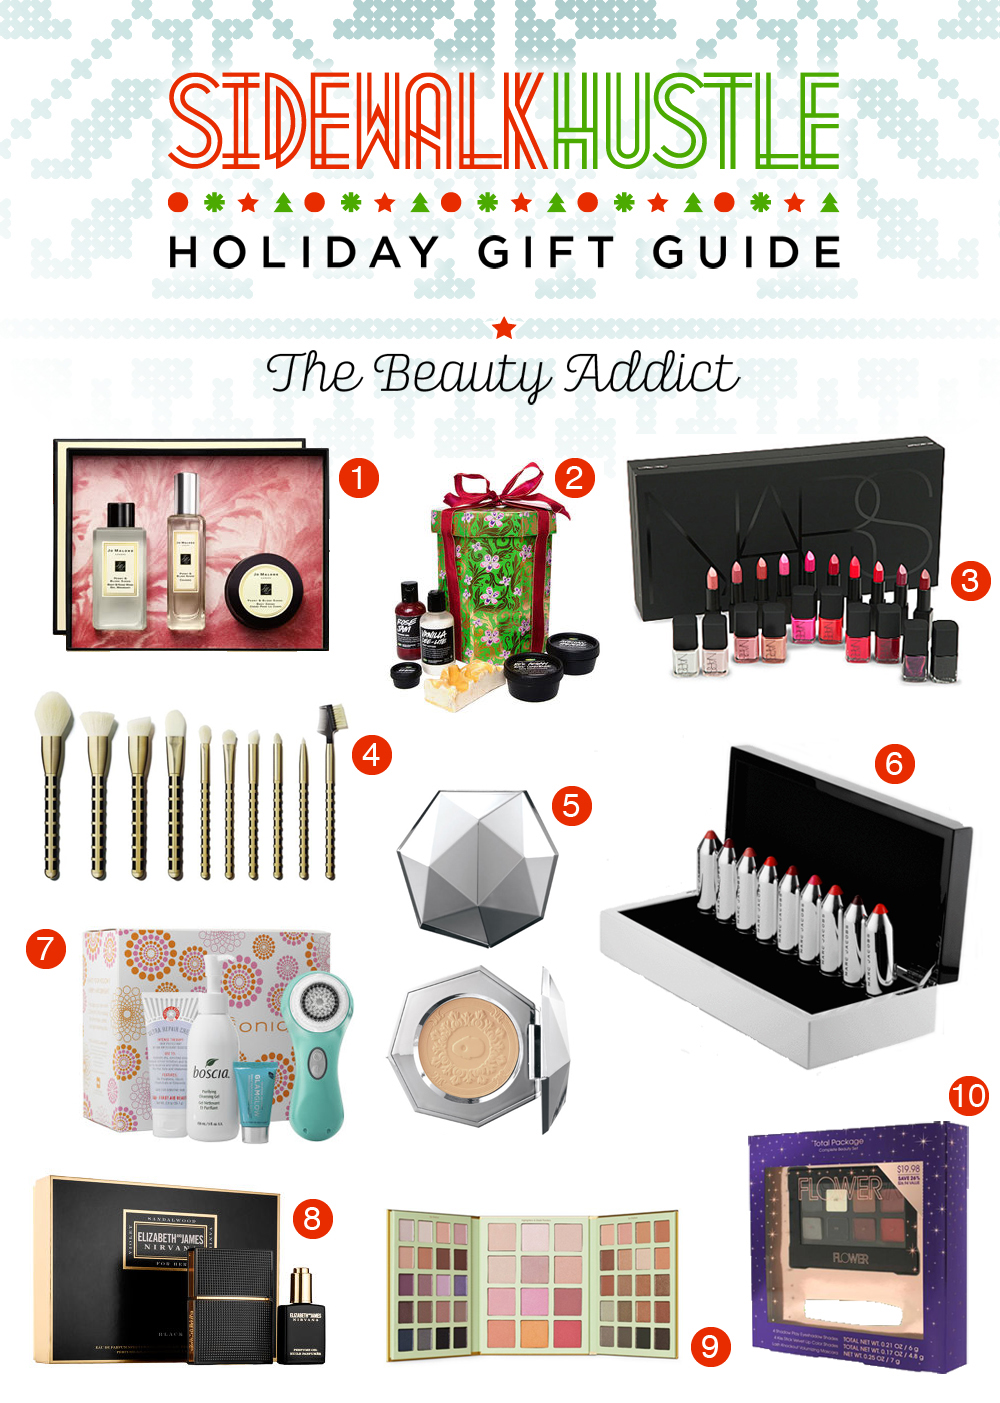 Beauty Addict Gift Guide 2014